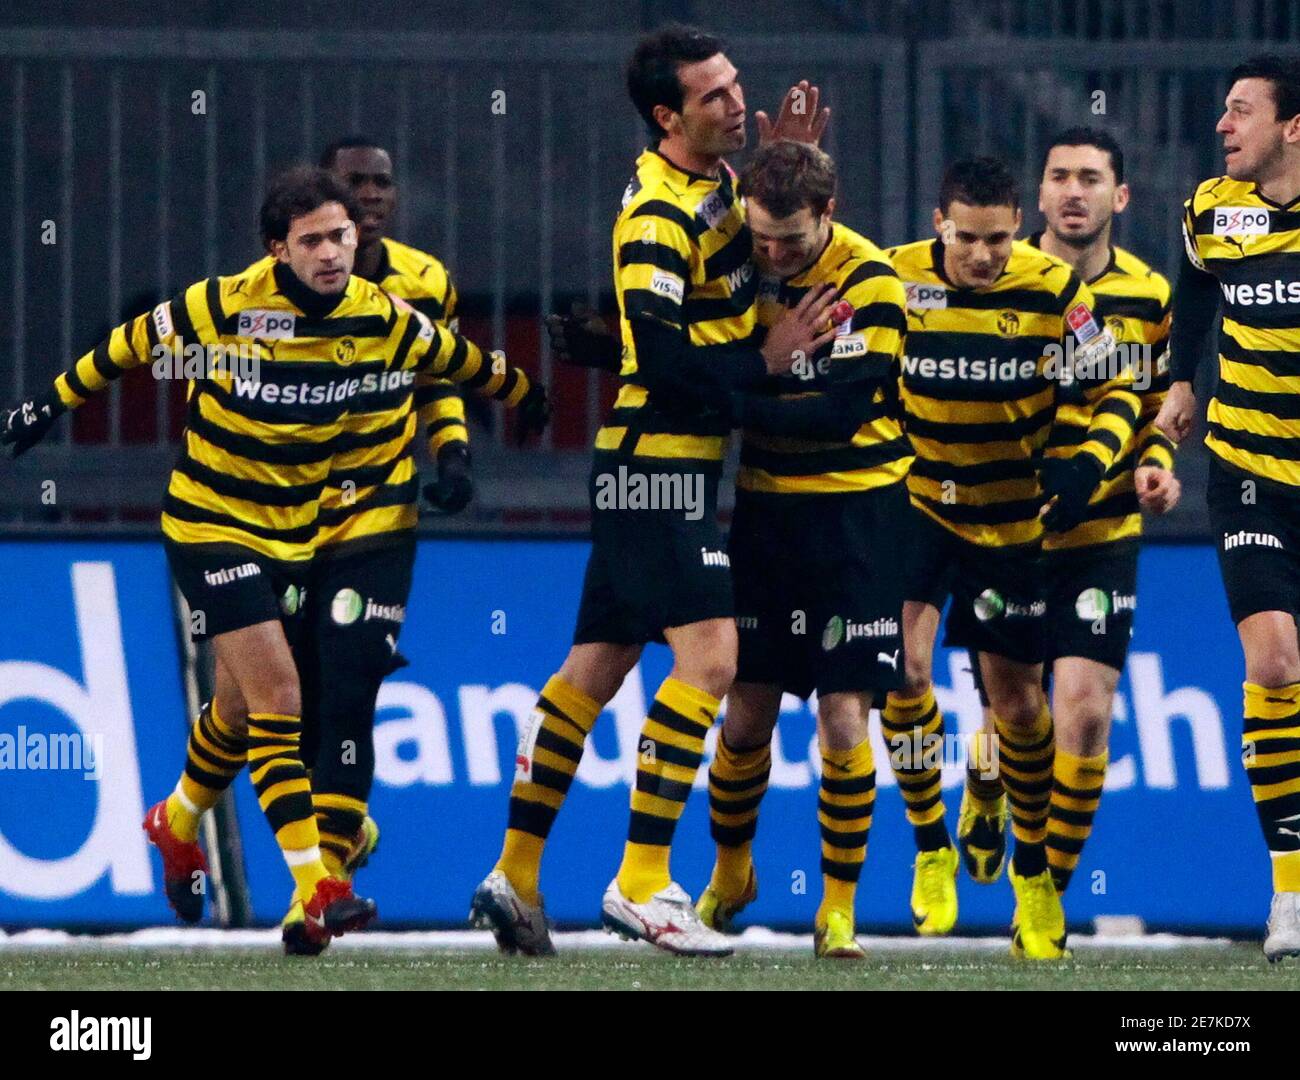 BSC Young Boys' players celebrate after the first goal of the match against  FC Luzern during their Swiss Super League soccer match in Bern February 13,  2010. REUTERS/Michael Buholzer (SWITZERLAND - Tags: